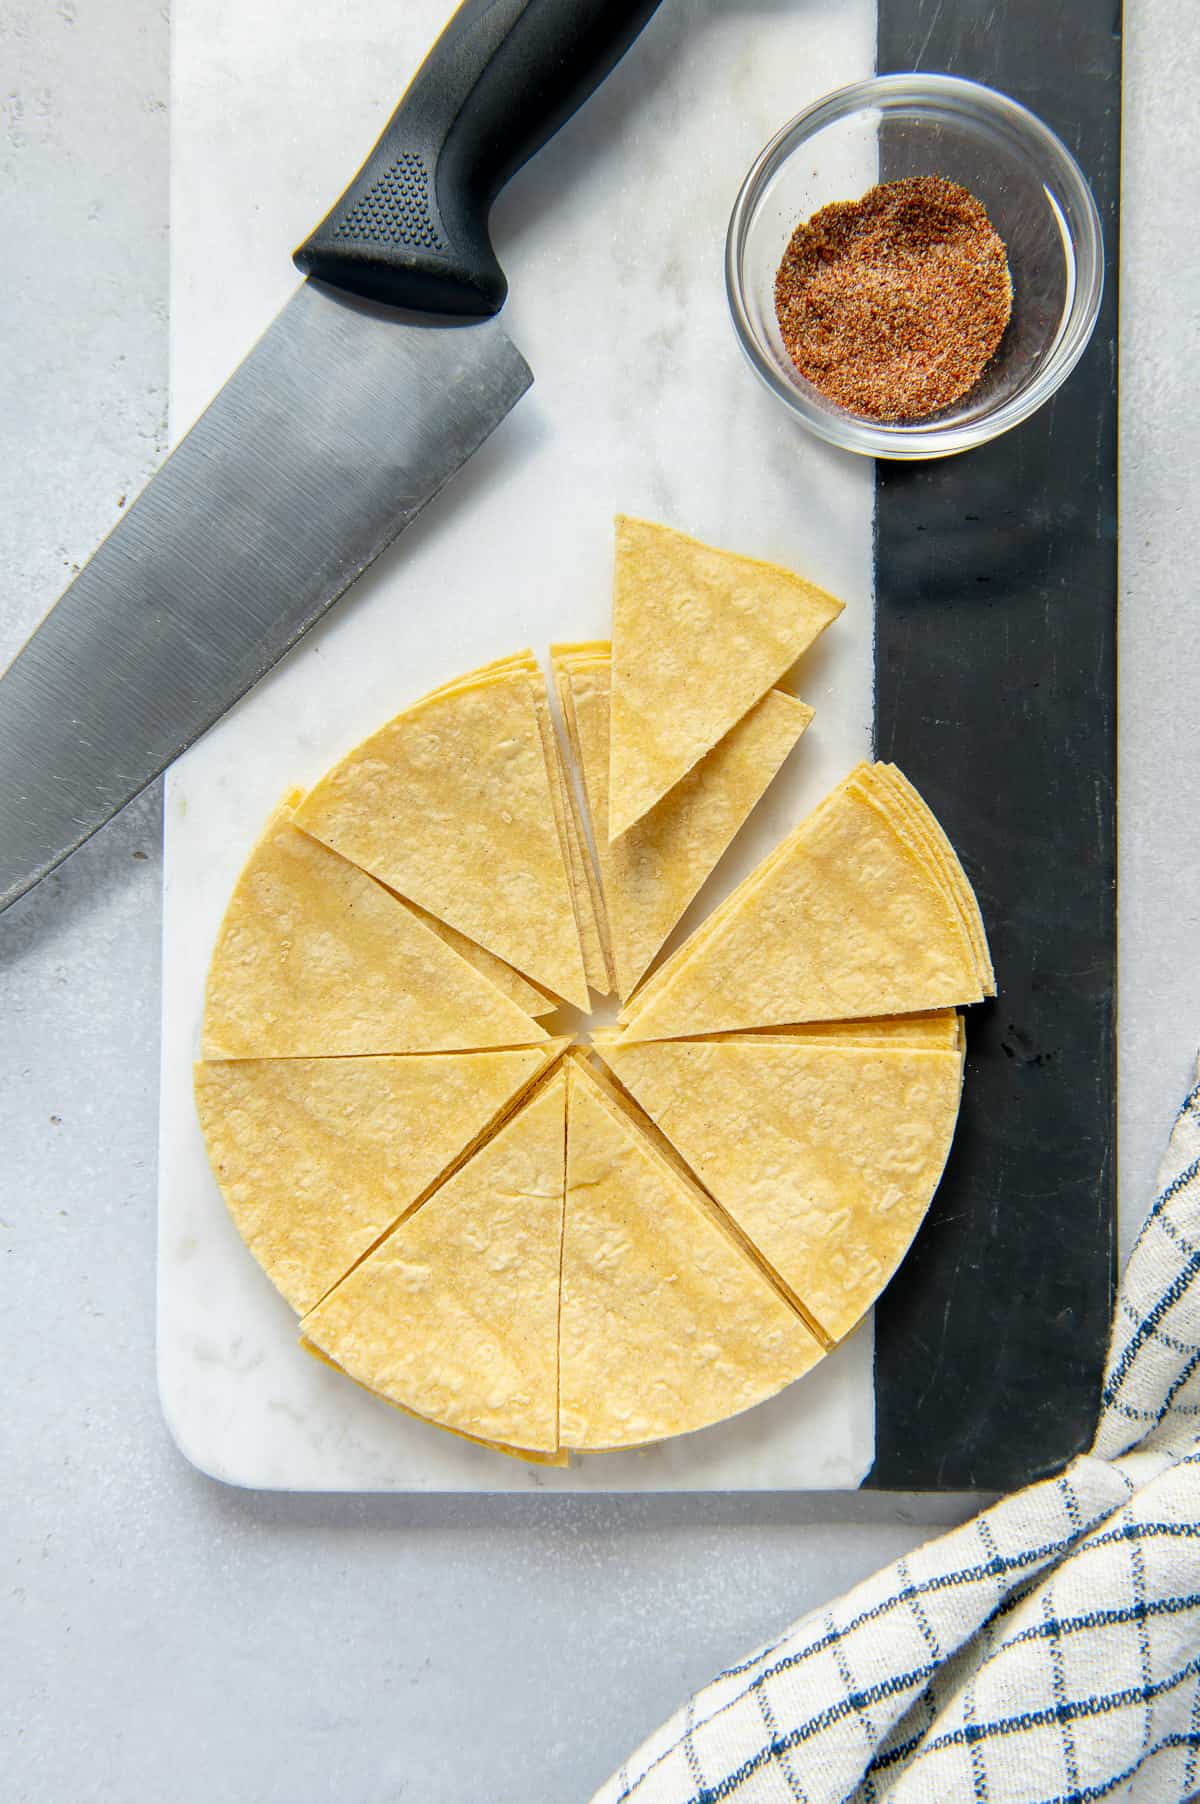 Corn tortillas cut into wedges to be made into chips.